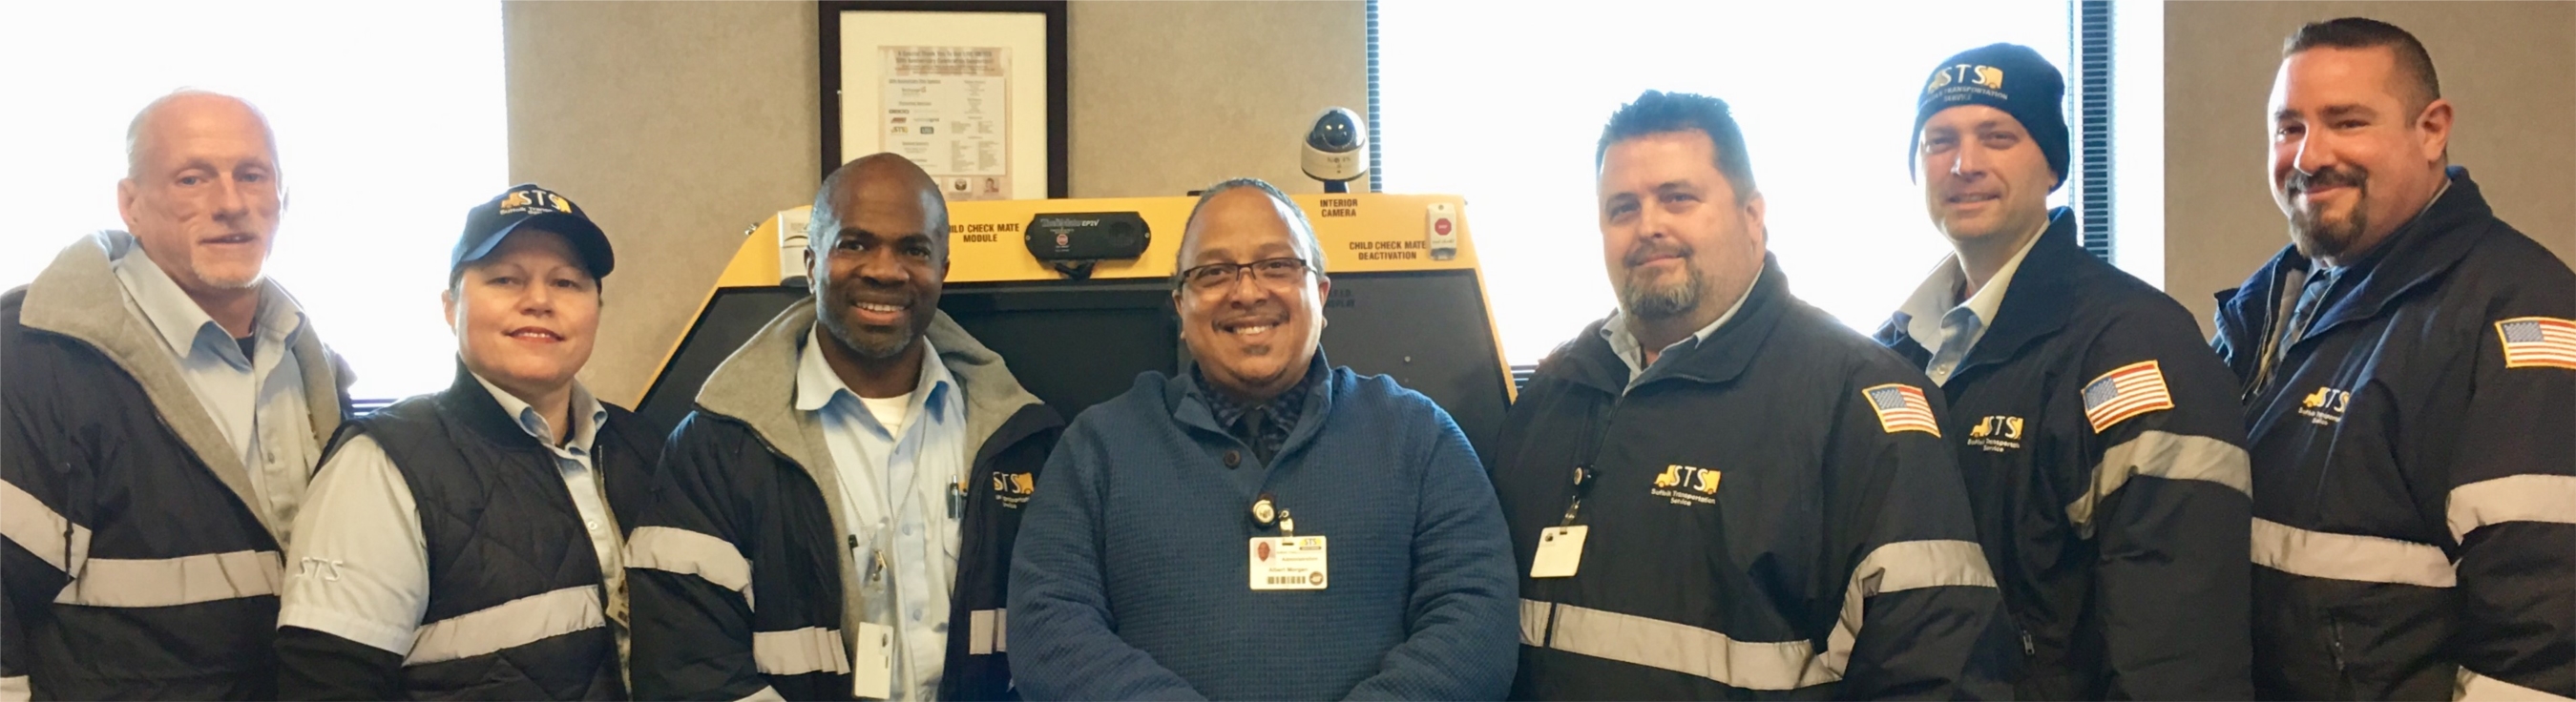 Suffolk Transportation Service provides a rewarding second career for retirees with outstanding pay, excellent benefits and first-class training.  
Many of the company’s current school bus drivers are retired civil servants, 